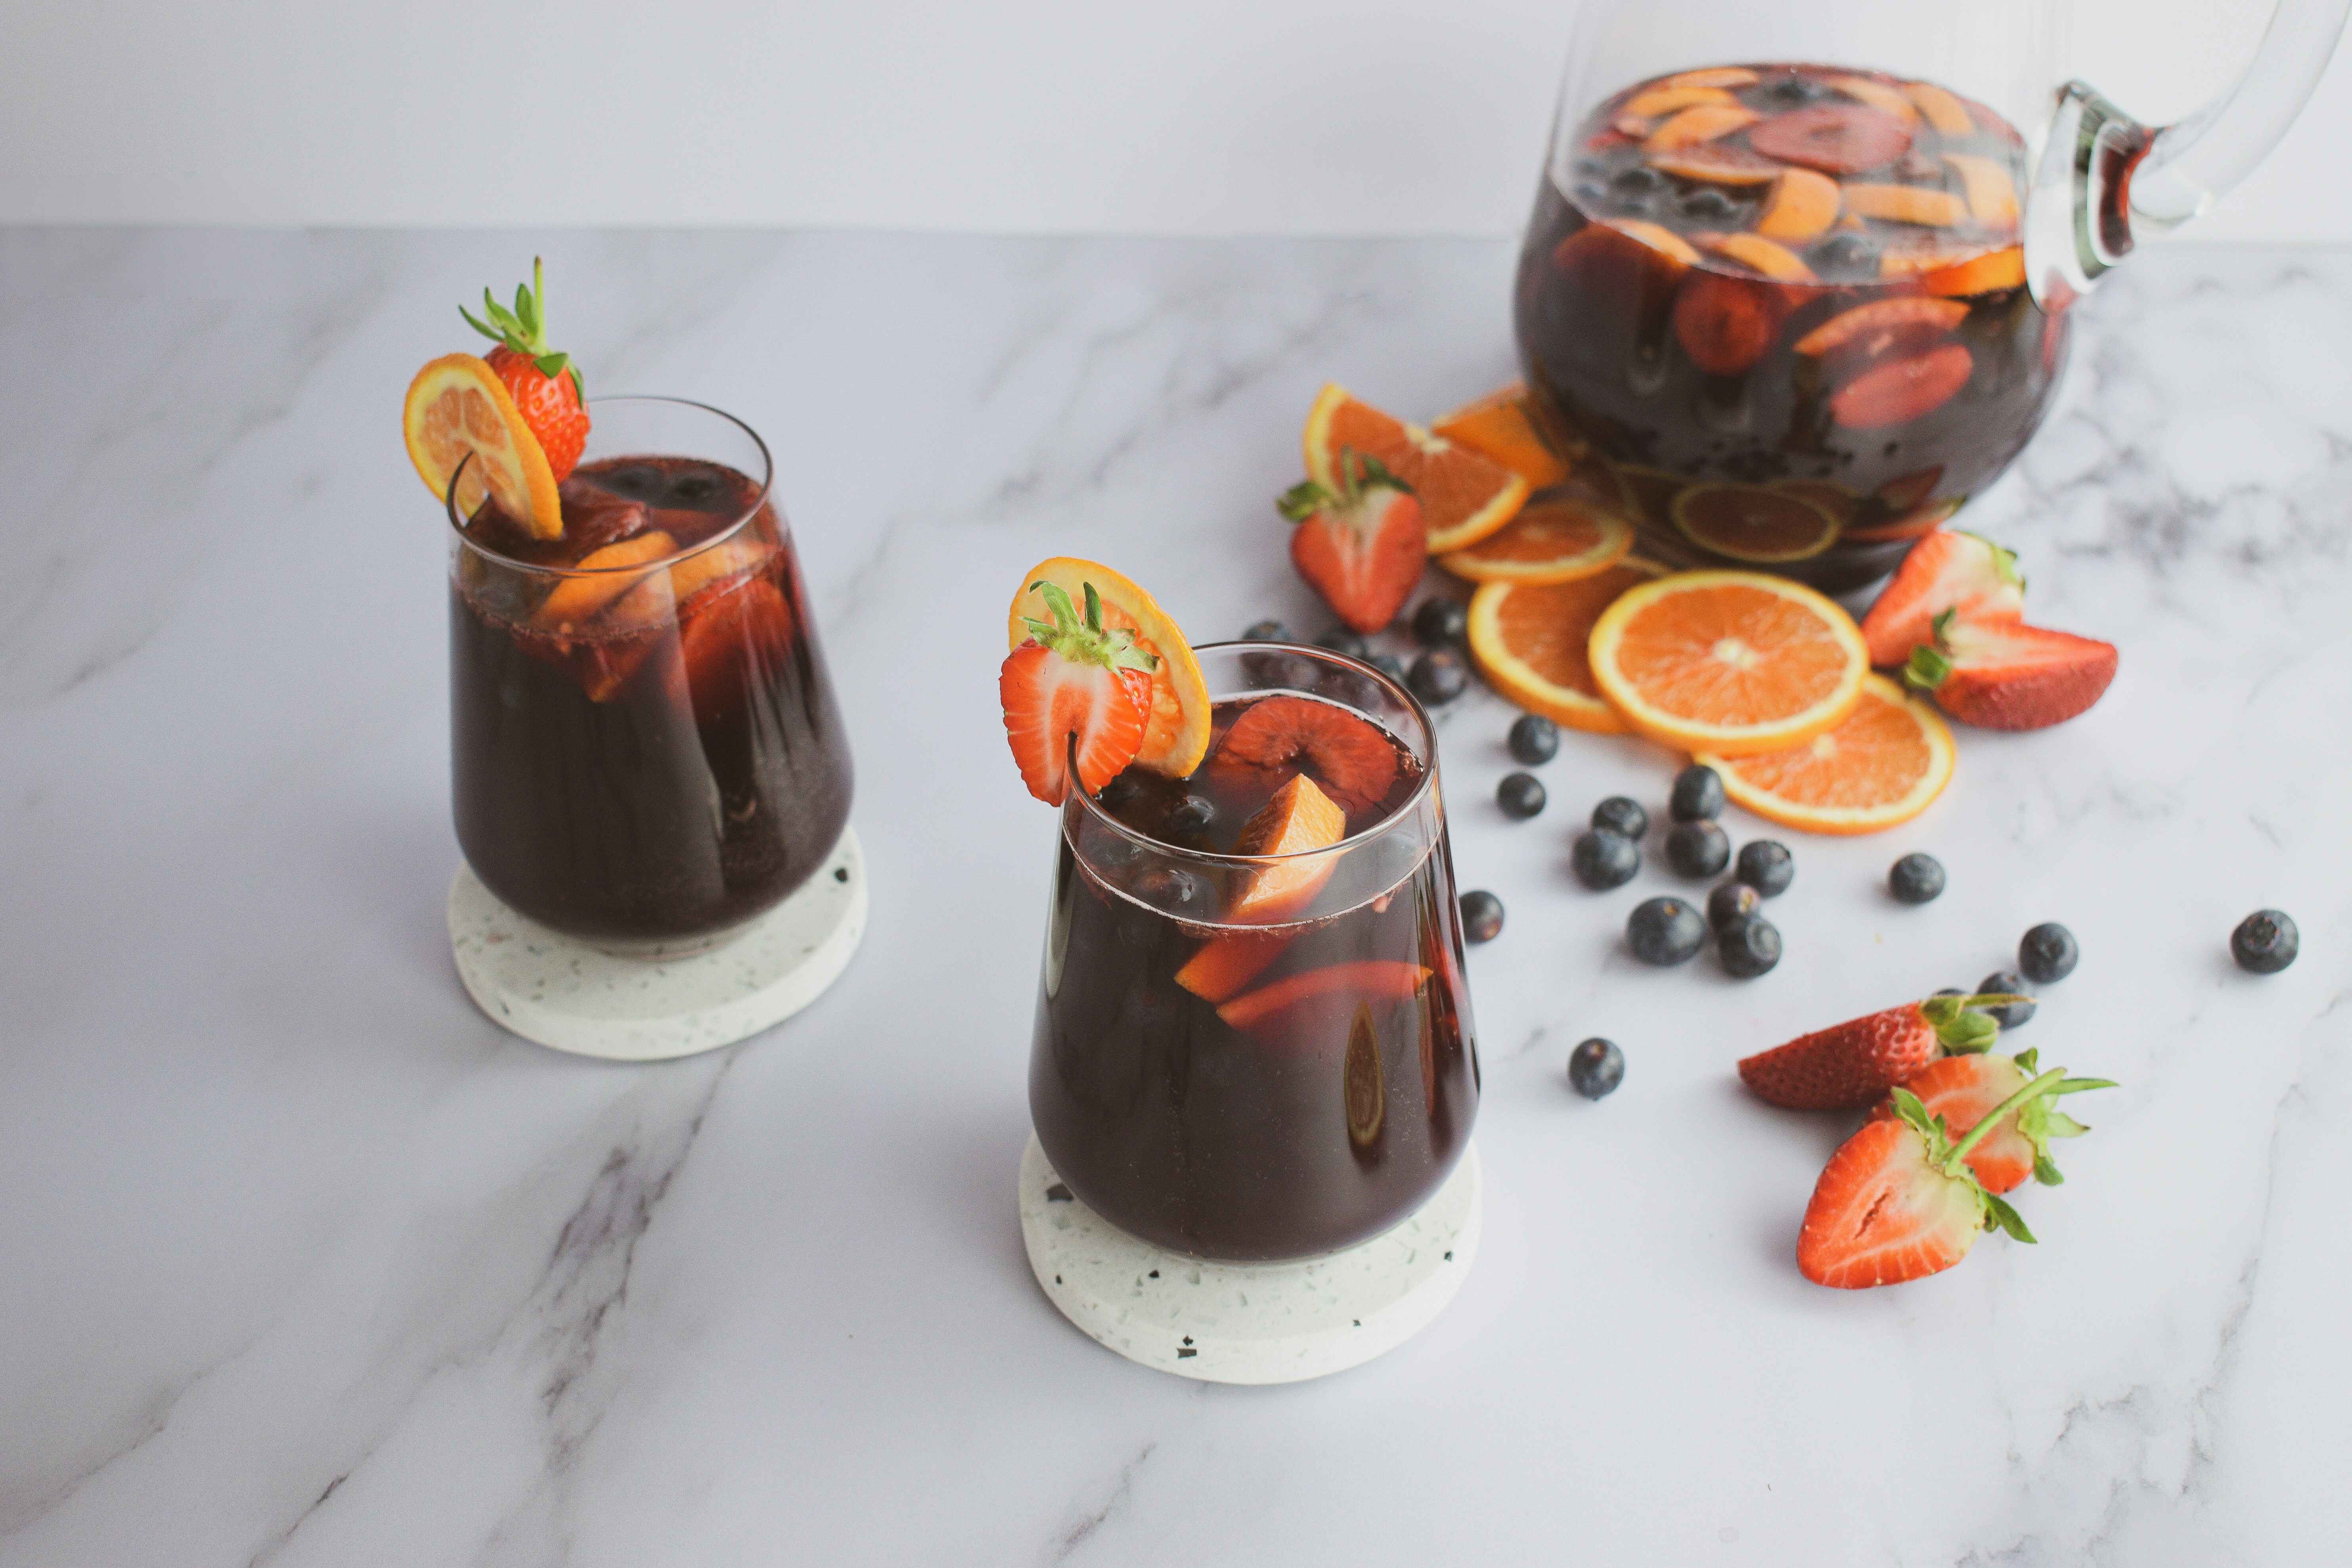 And when you are hosting such a party, you would want to serve some delicious drinks too, that pair perfectly with grilled recipes. One cocktail that is ideal for warm summer evenings is the sangria, a blend of wine, some brandy, orange liqueur and lots of cut up fruits. 